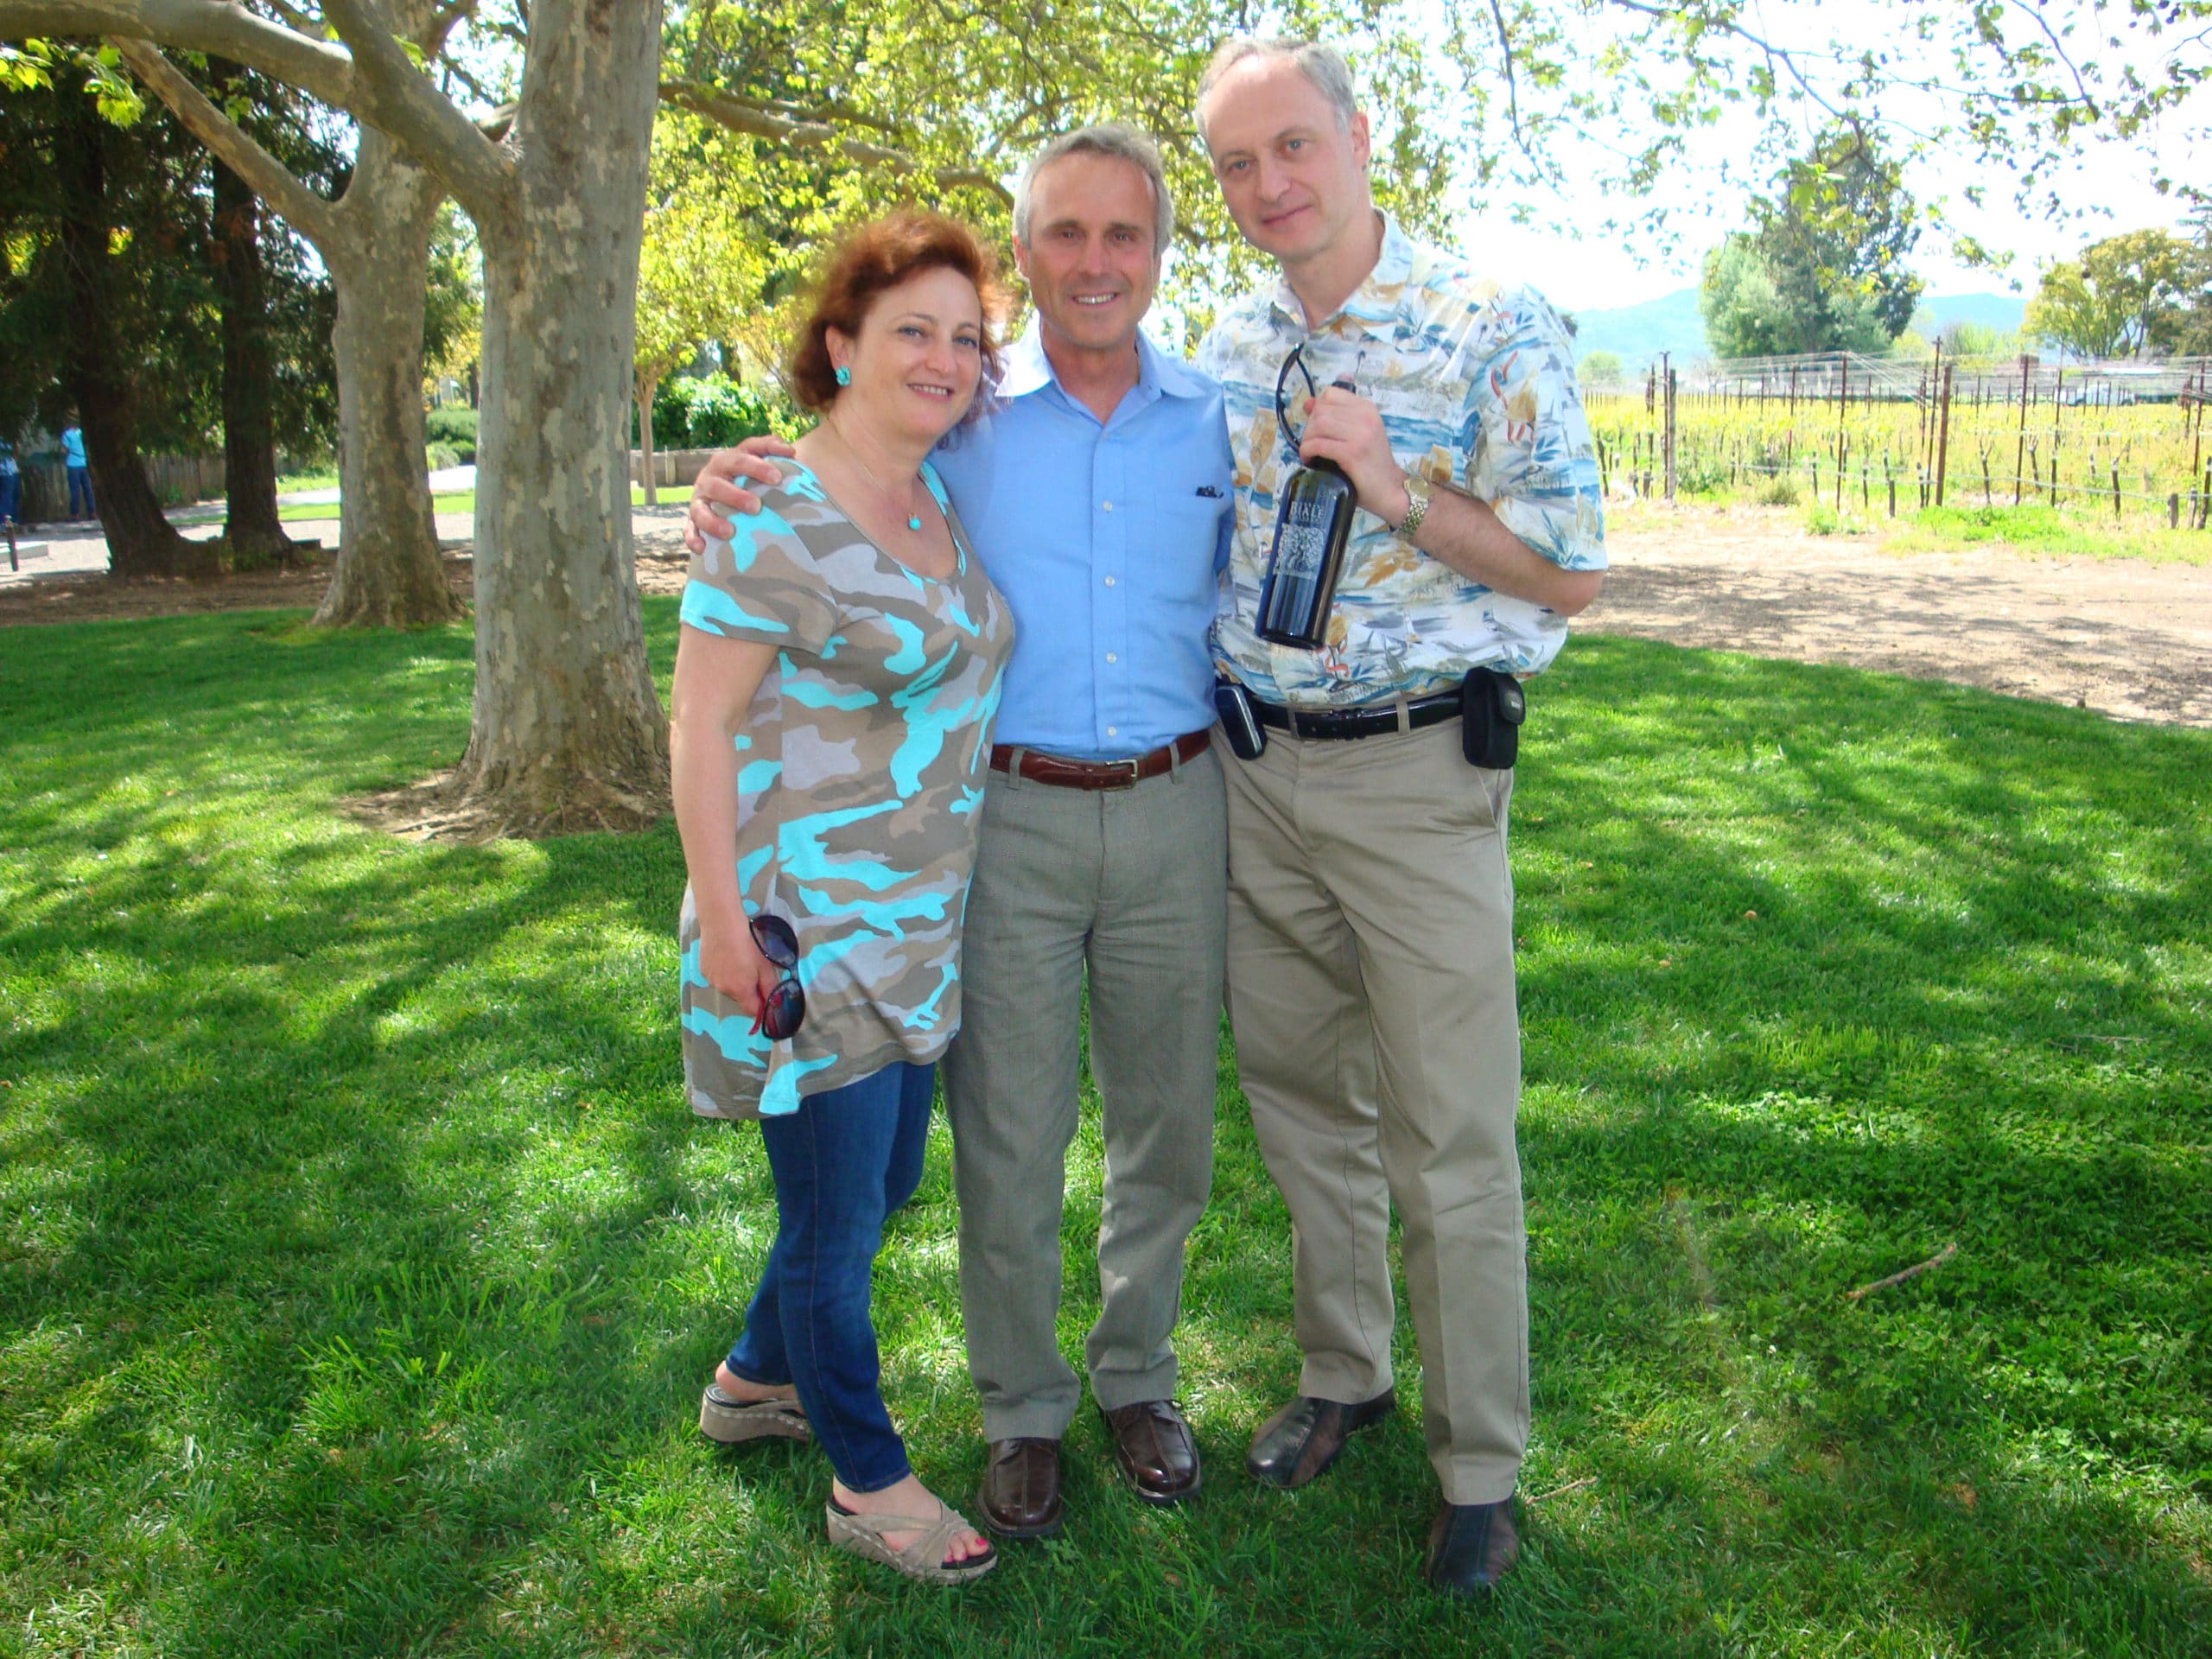 3 people smiling holding Biale wine bottle in grass with trees and vineyards in background